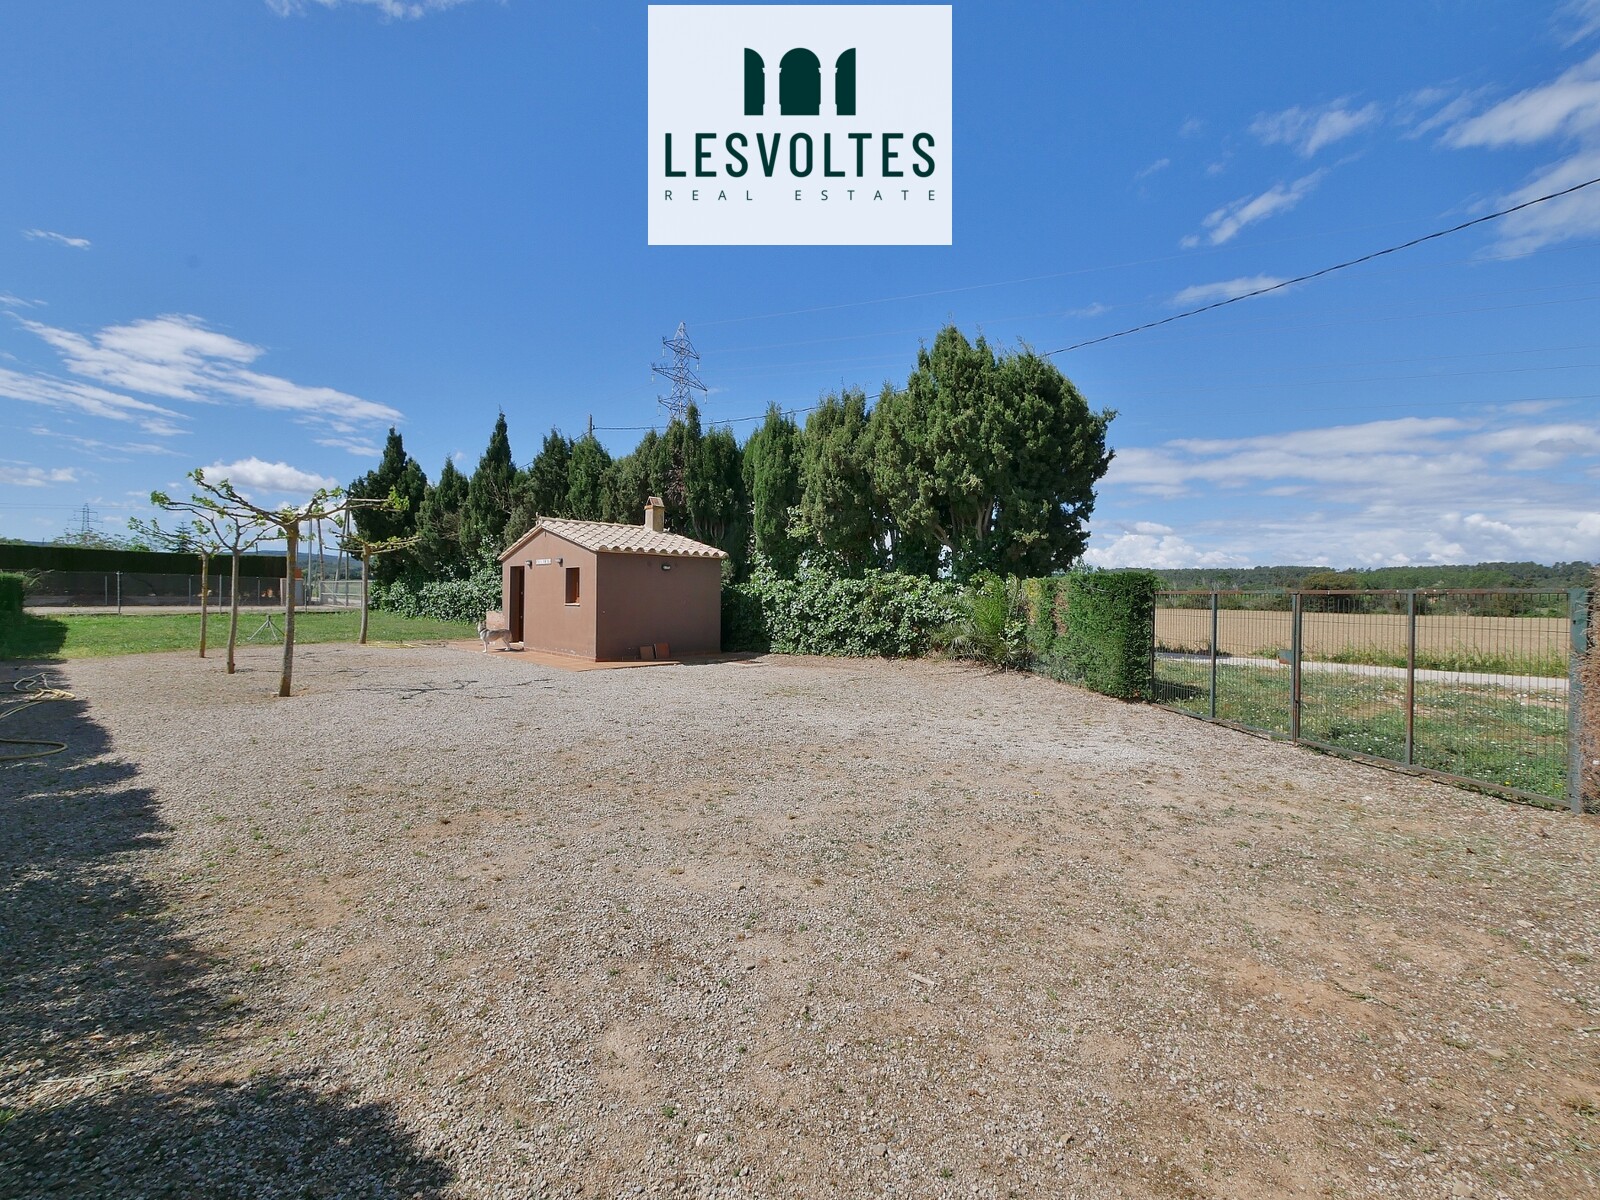 DO YOU WANT TO ENJOY A LITTLE HIDDEN TREASURE IN THE BAIX EMPORDÀ? 17 M2 SHUTTLE WITH 400 M2 LAND FOR RENT IN PERATALLADA.